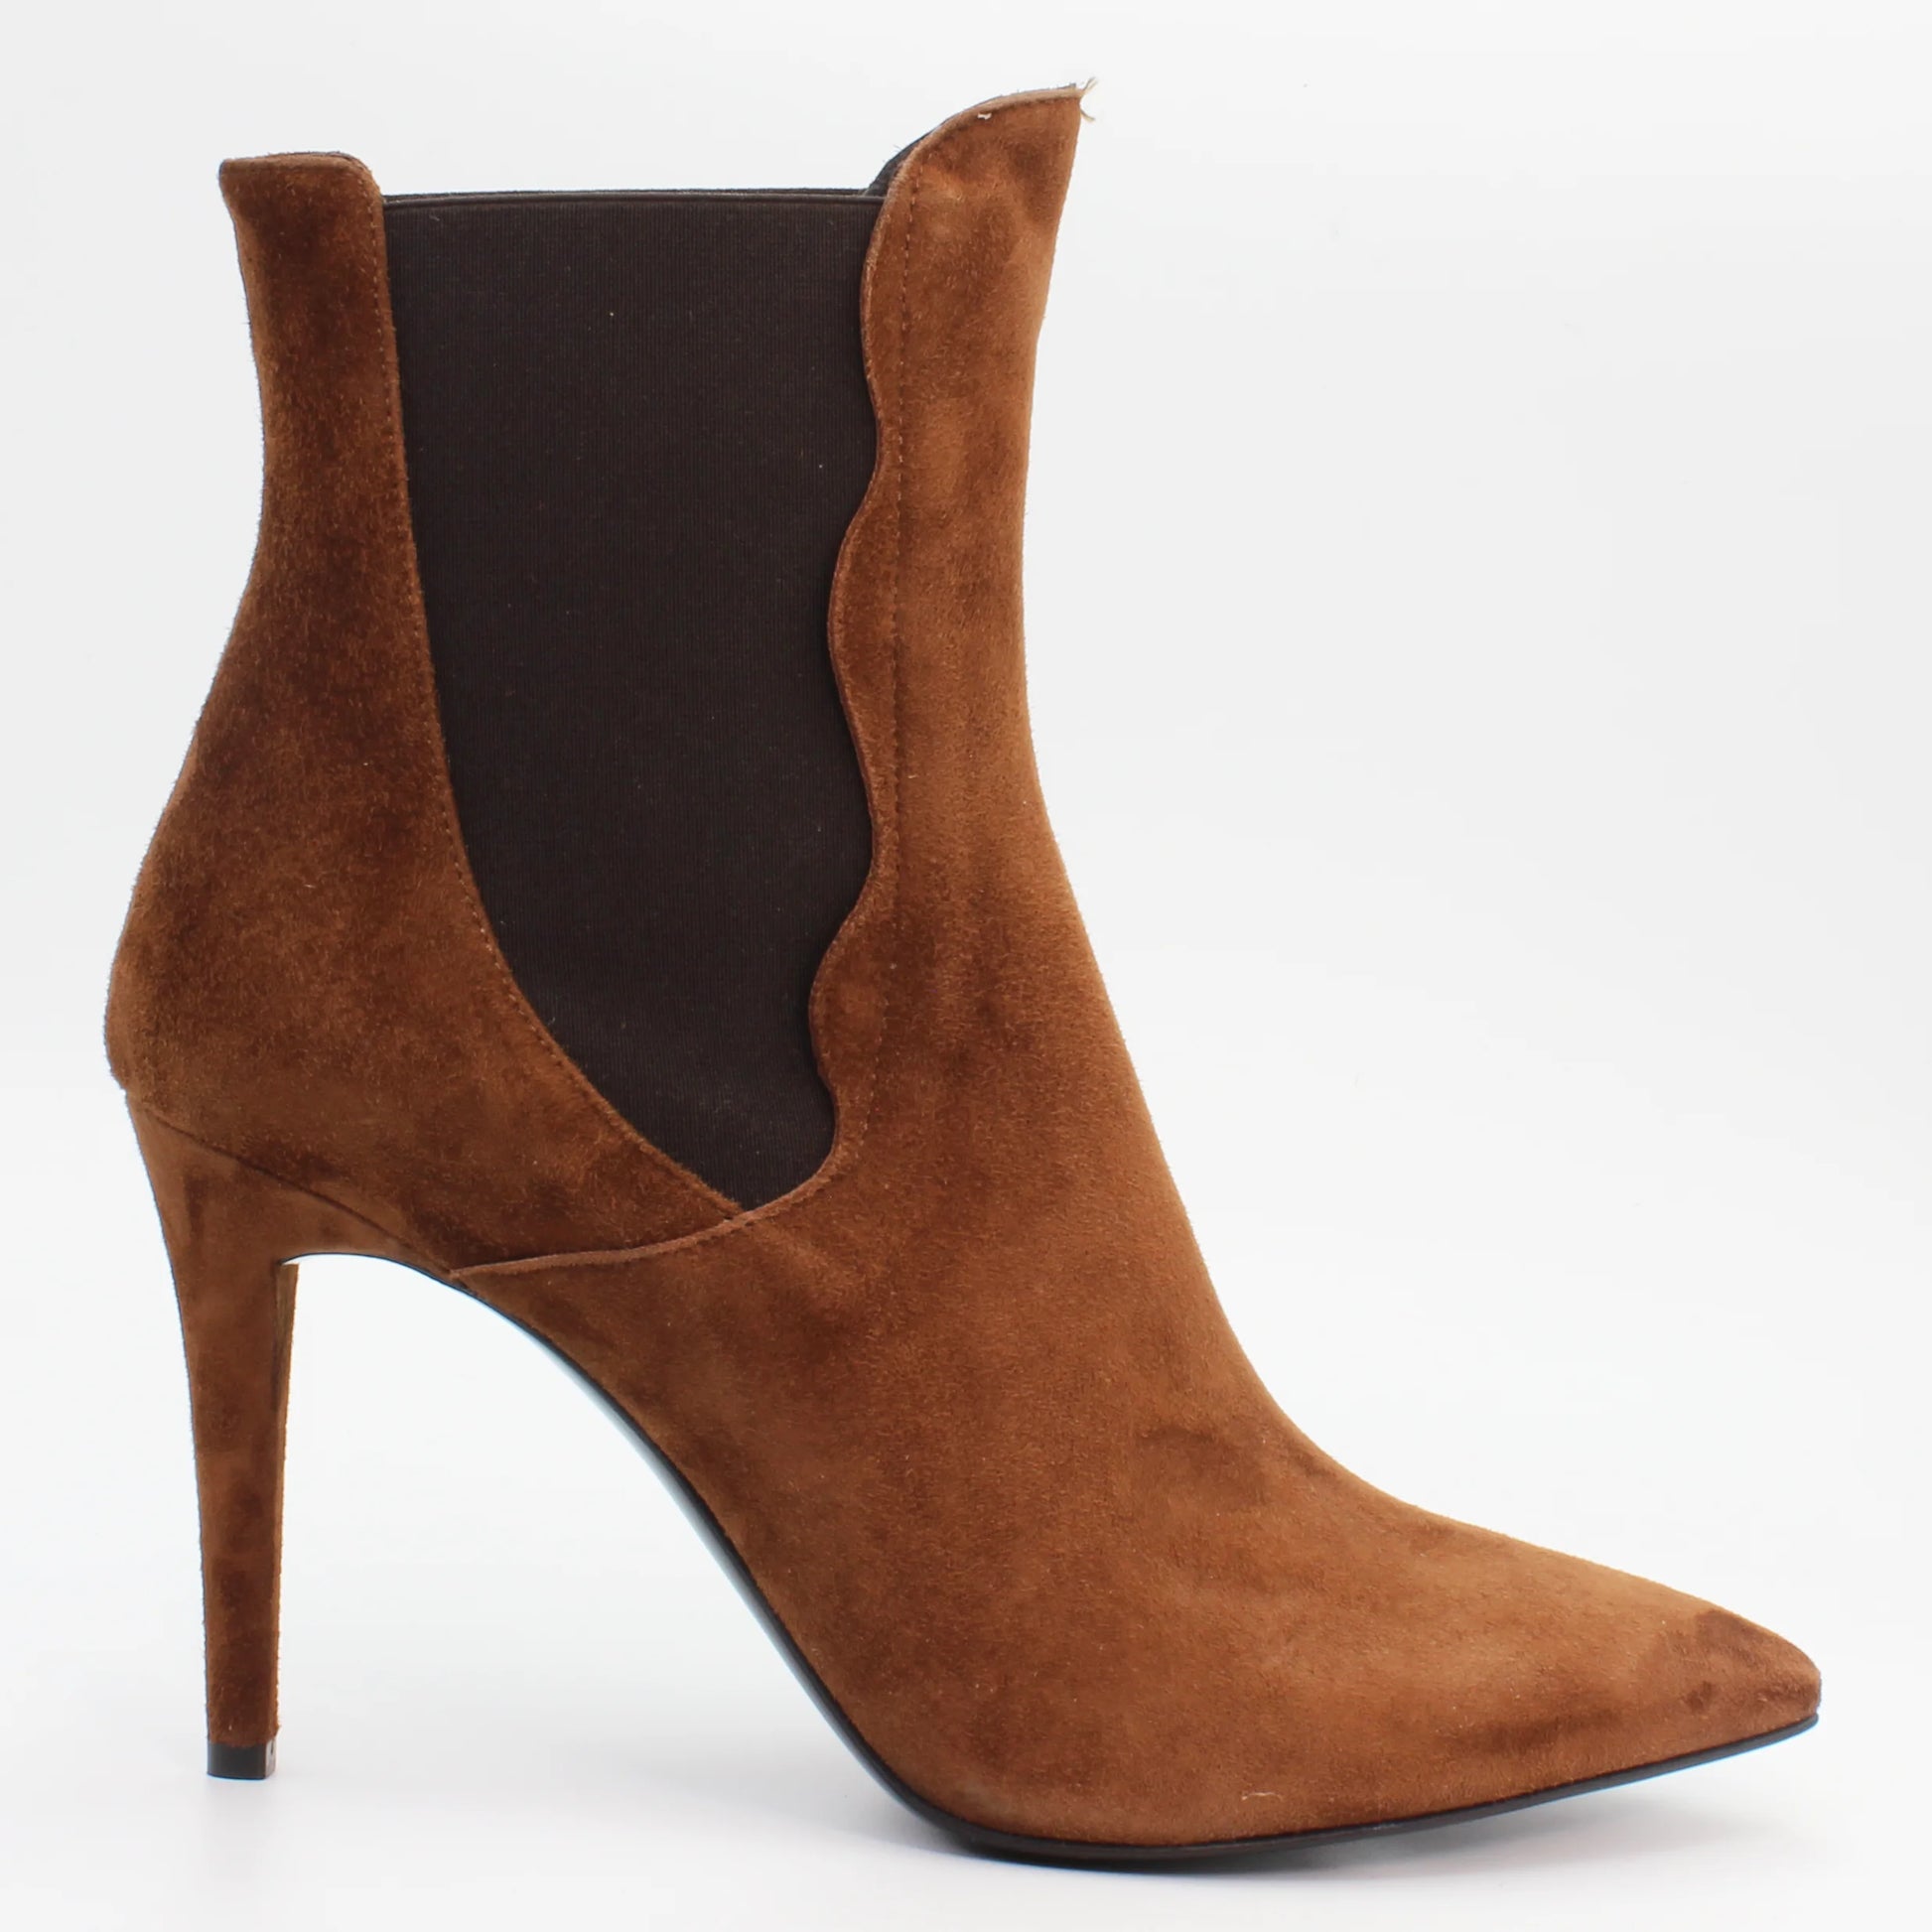 Shop Ladies Italian Suede Stiletto Ankle Boot in Brown (AL57525) or browse our range of hand-made Italian ankle boots in leather or suede in-store at Aliverti Durban or Cape Town, or shop online. We deliver in South Africa & offer multiple payment plans as well as accept multiple safe & secure payment methods.